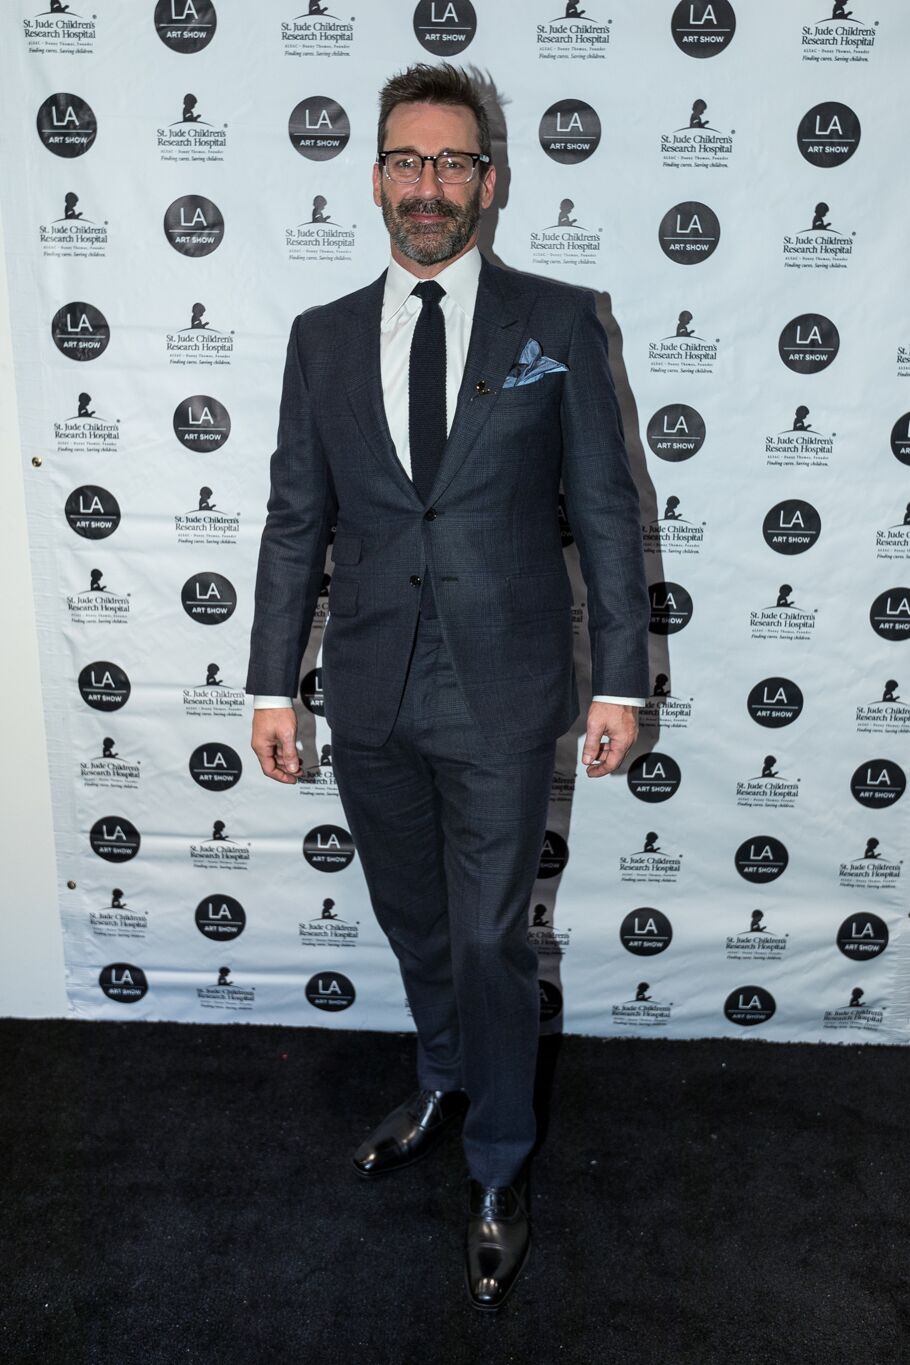 Jon Hamm spoke at the opening night premiere, in support of St. Jude Children